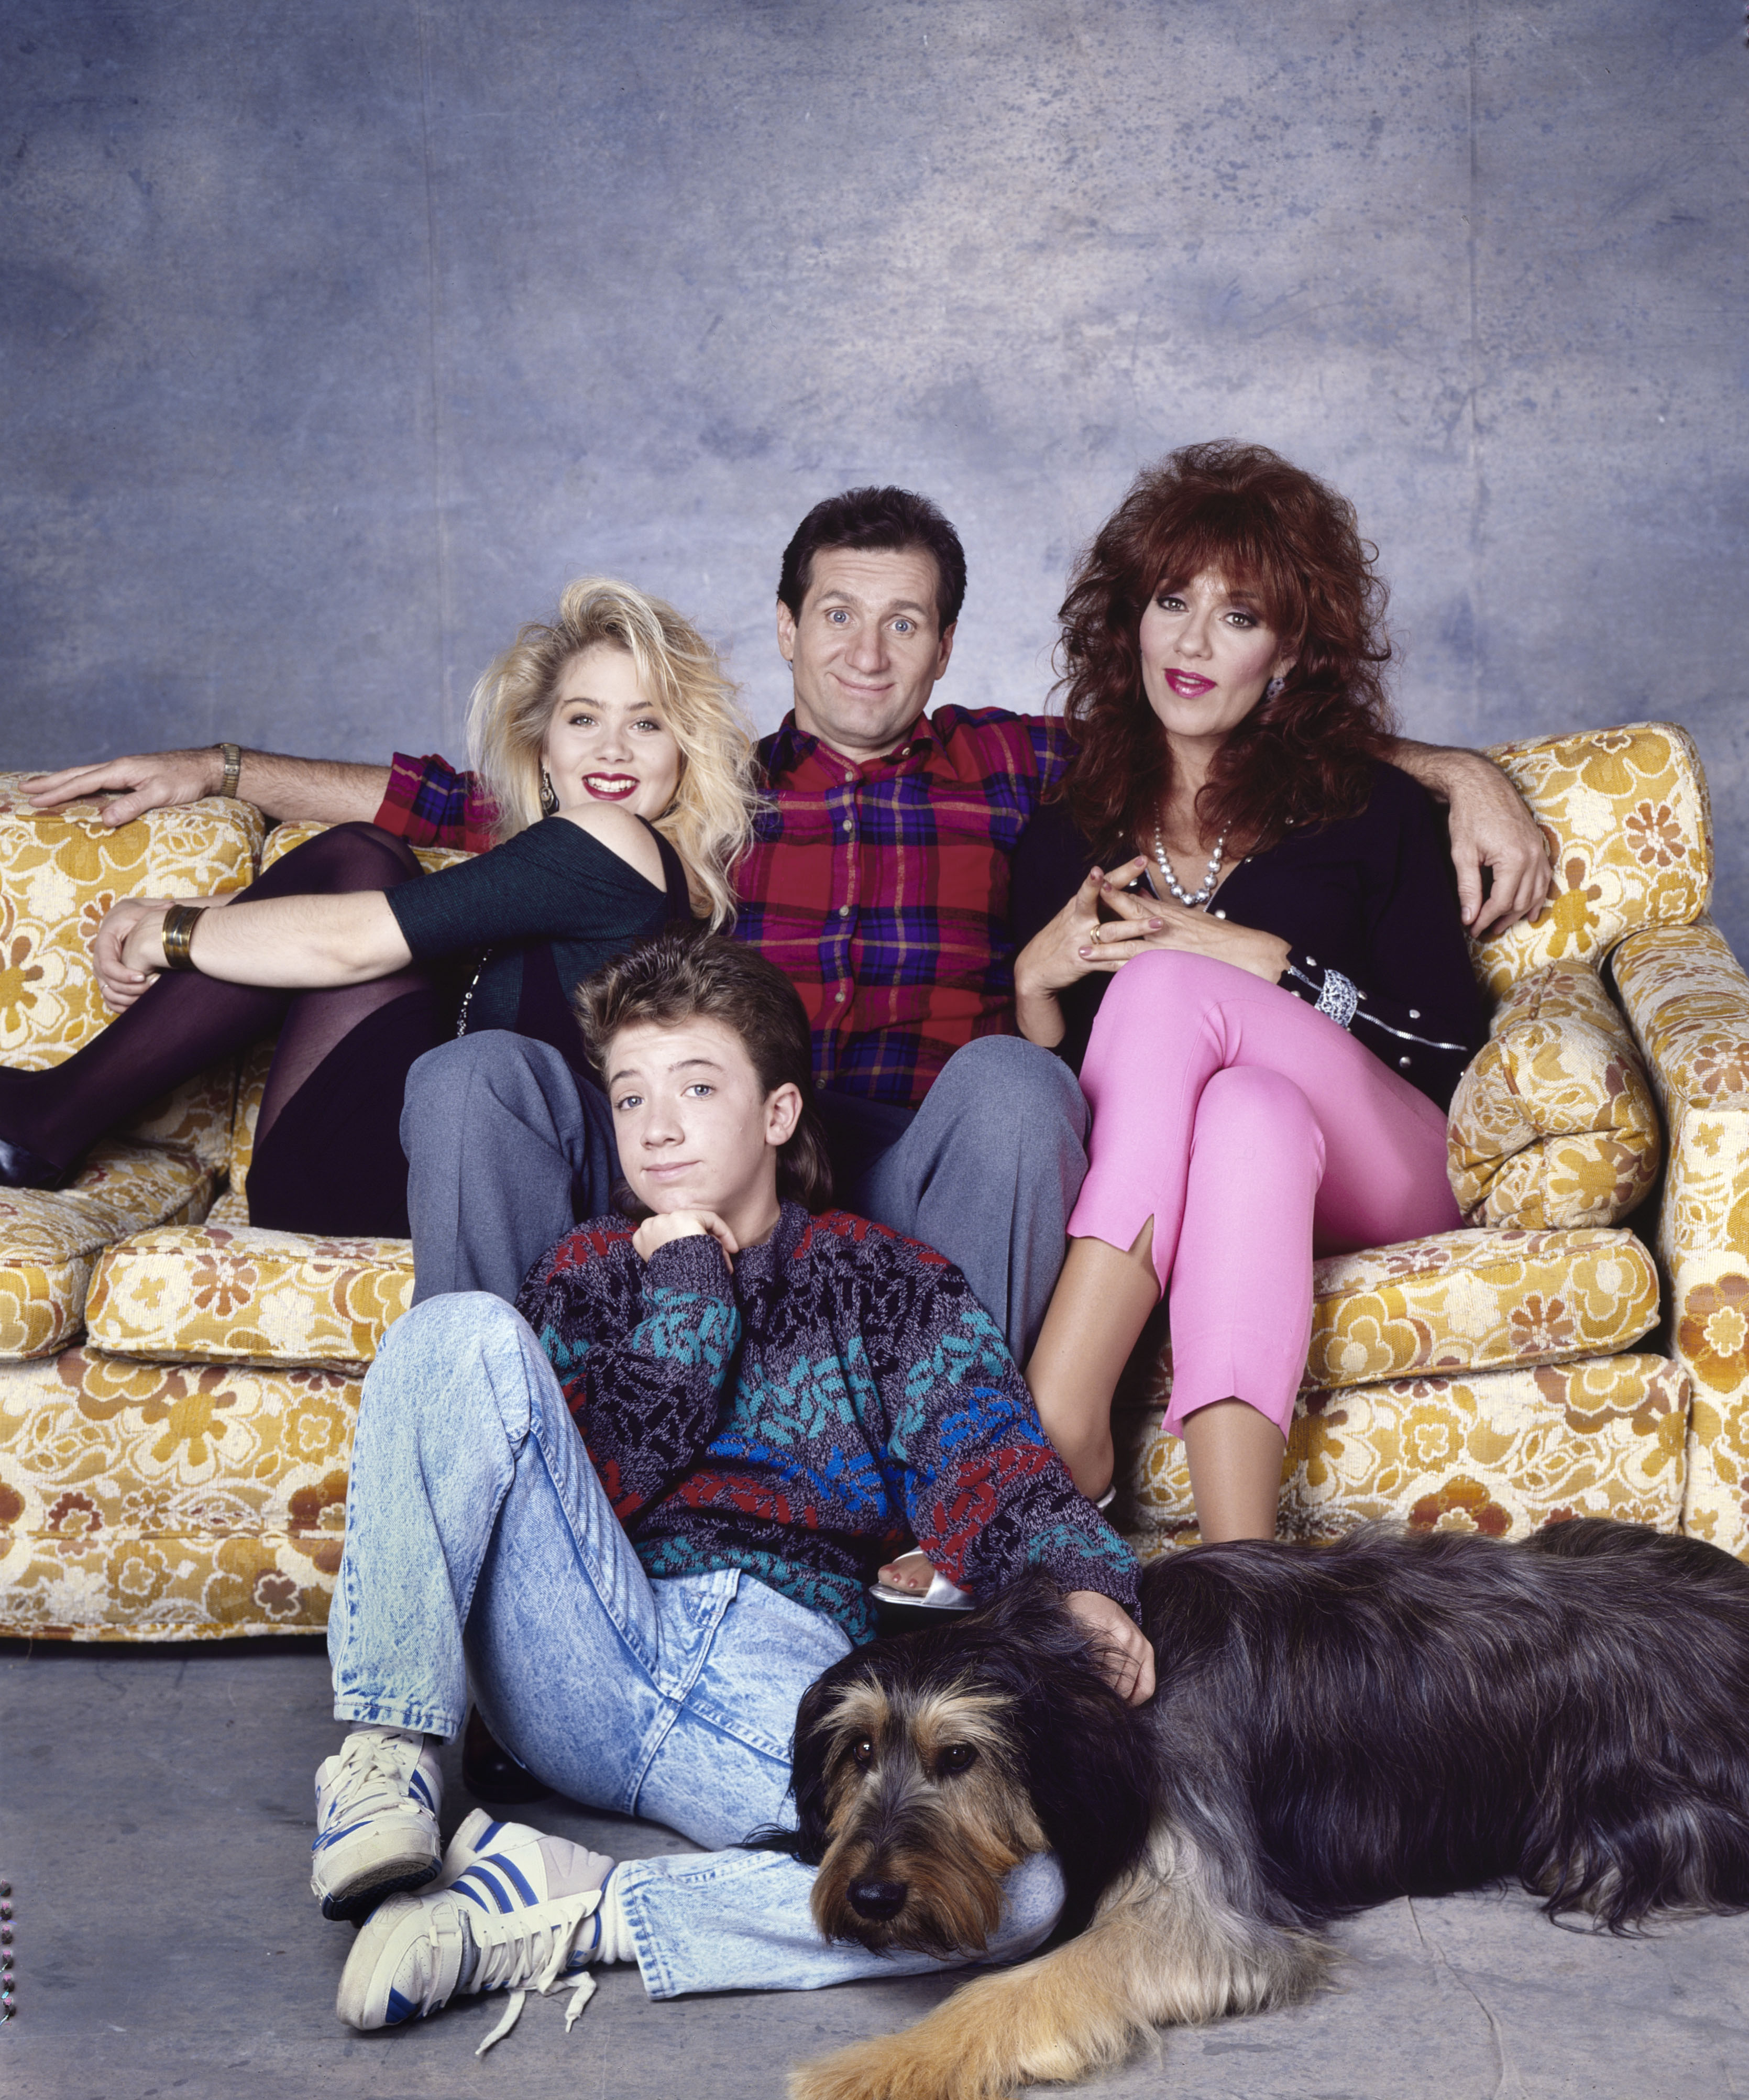 Christina Applegate, David Faustino, Ed O'Nell, and Katey Sagal as their characters from "Married... with Children" in Los Angeles, 1988 | Source: Getty Images